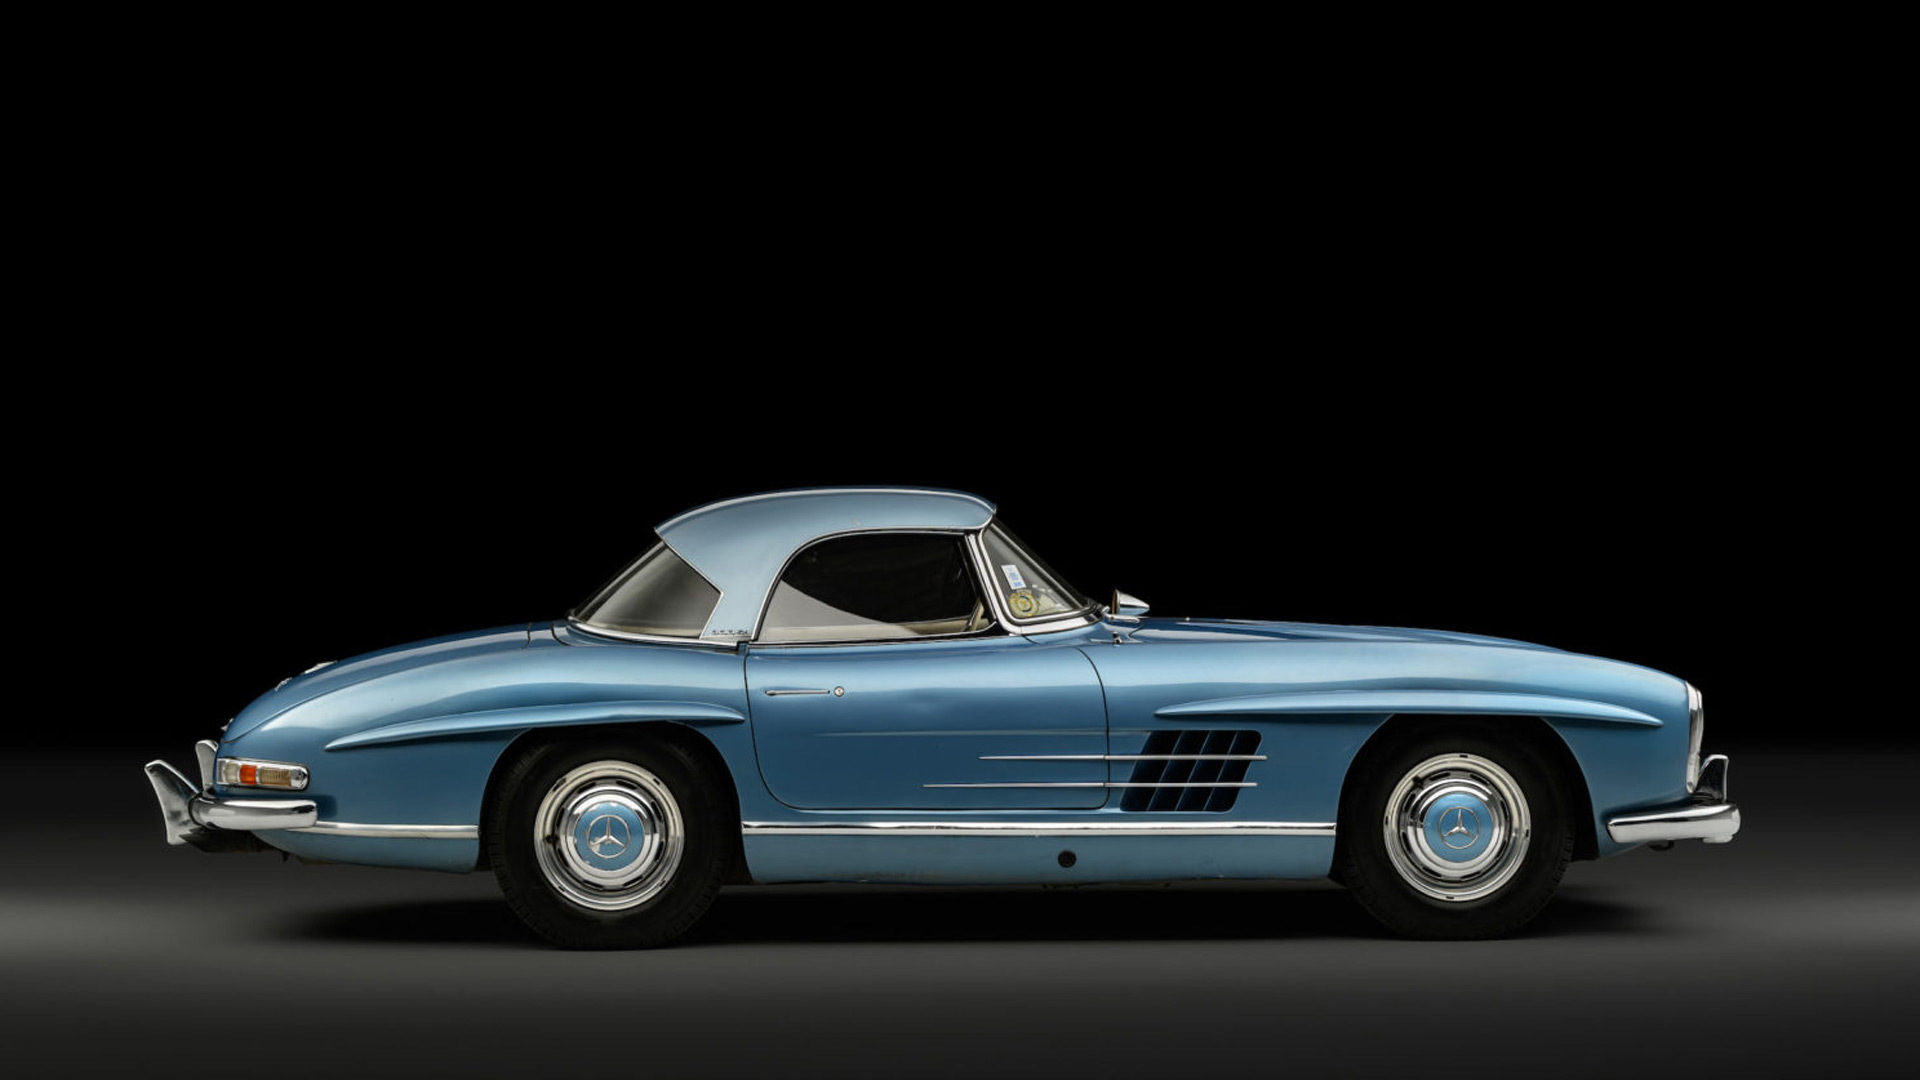 1958 Mercedes-Benz 300 SL Roadster owned by Juan Manuel Fangio - Photo credit: RM Sotheby's